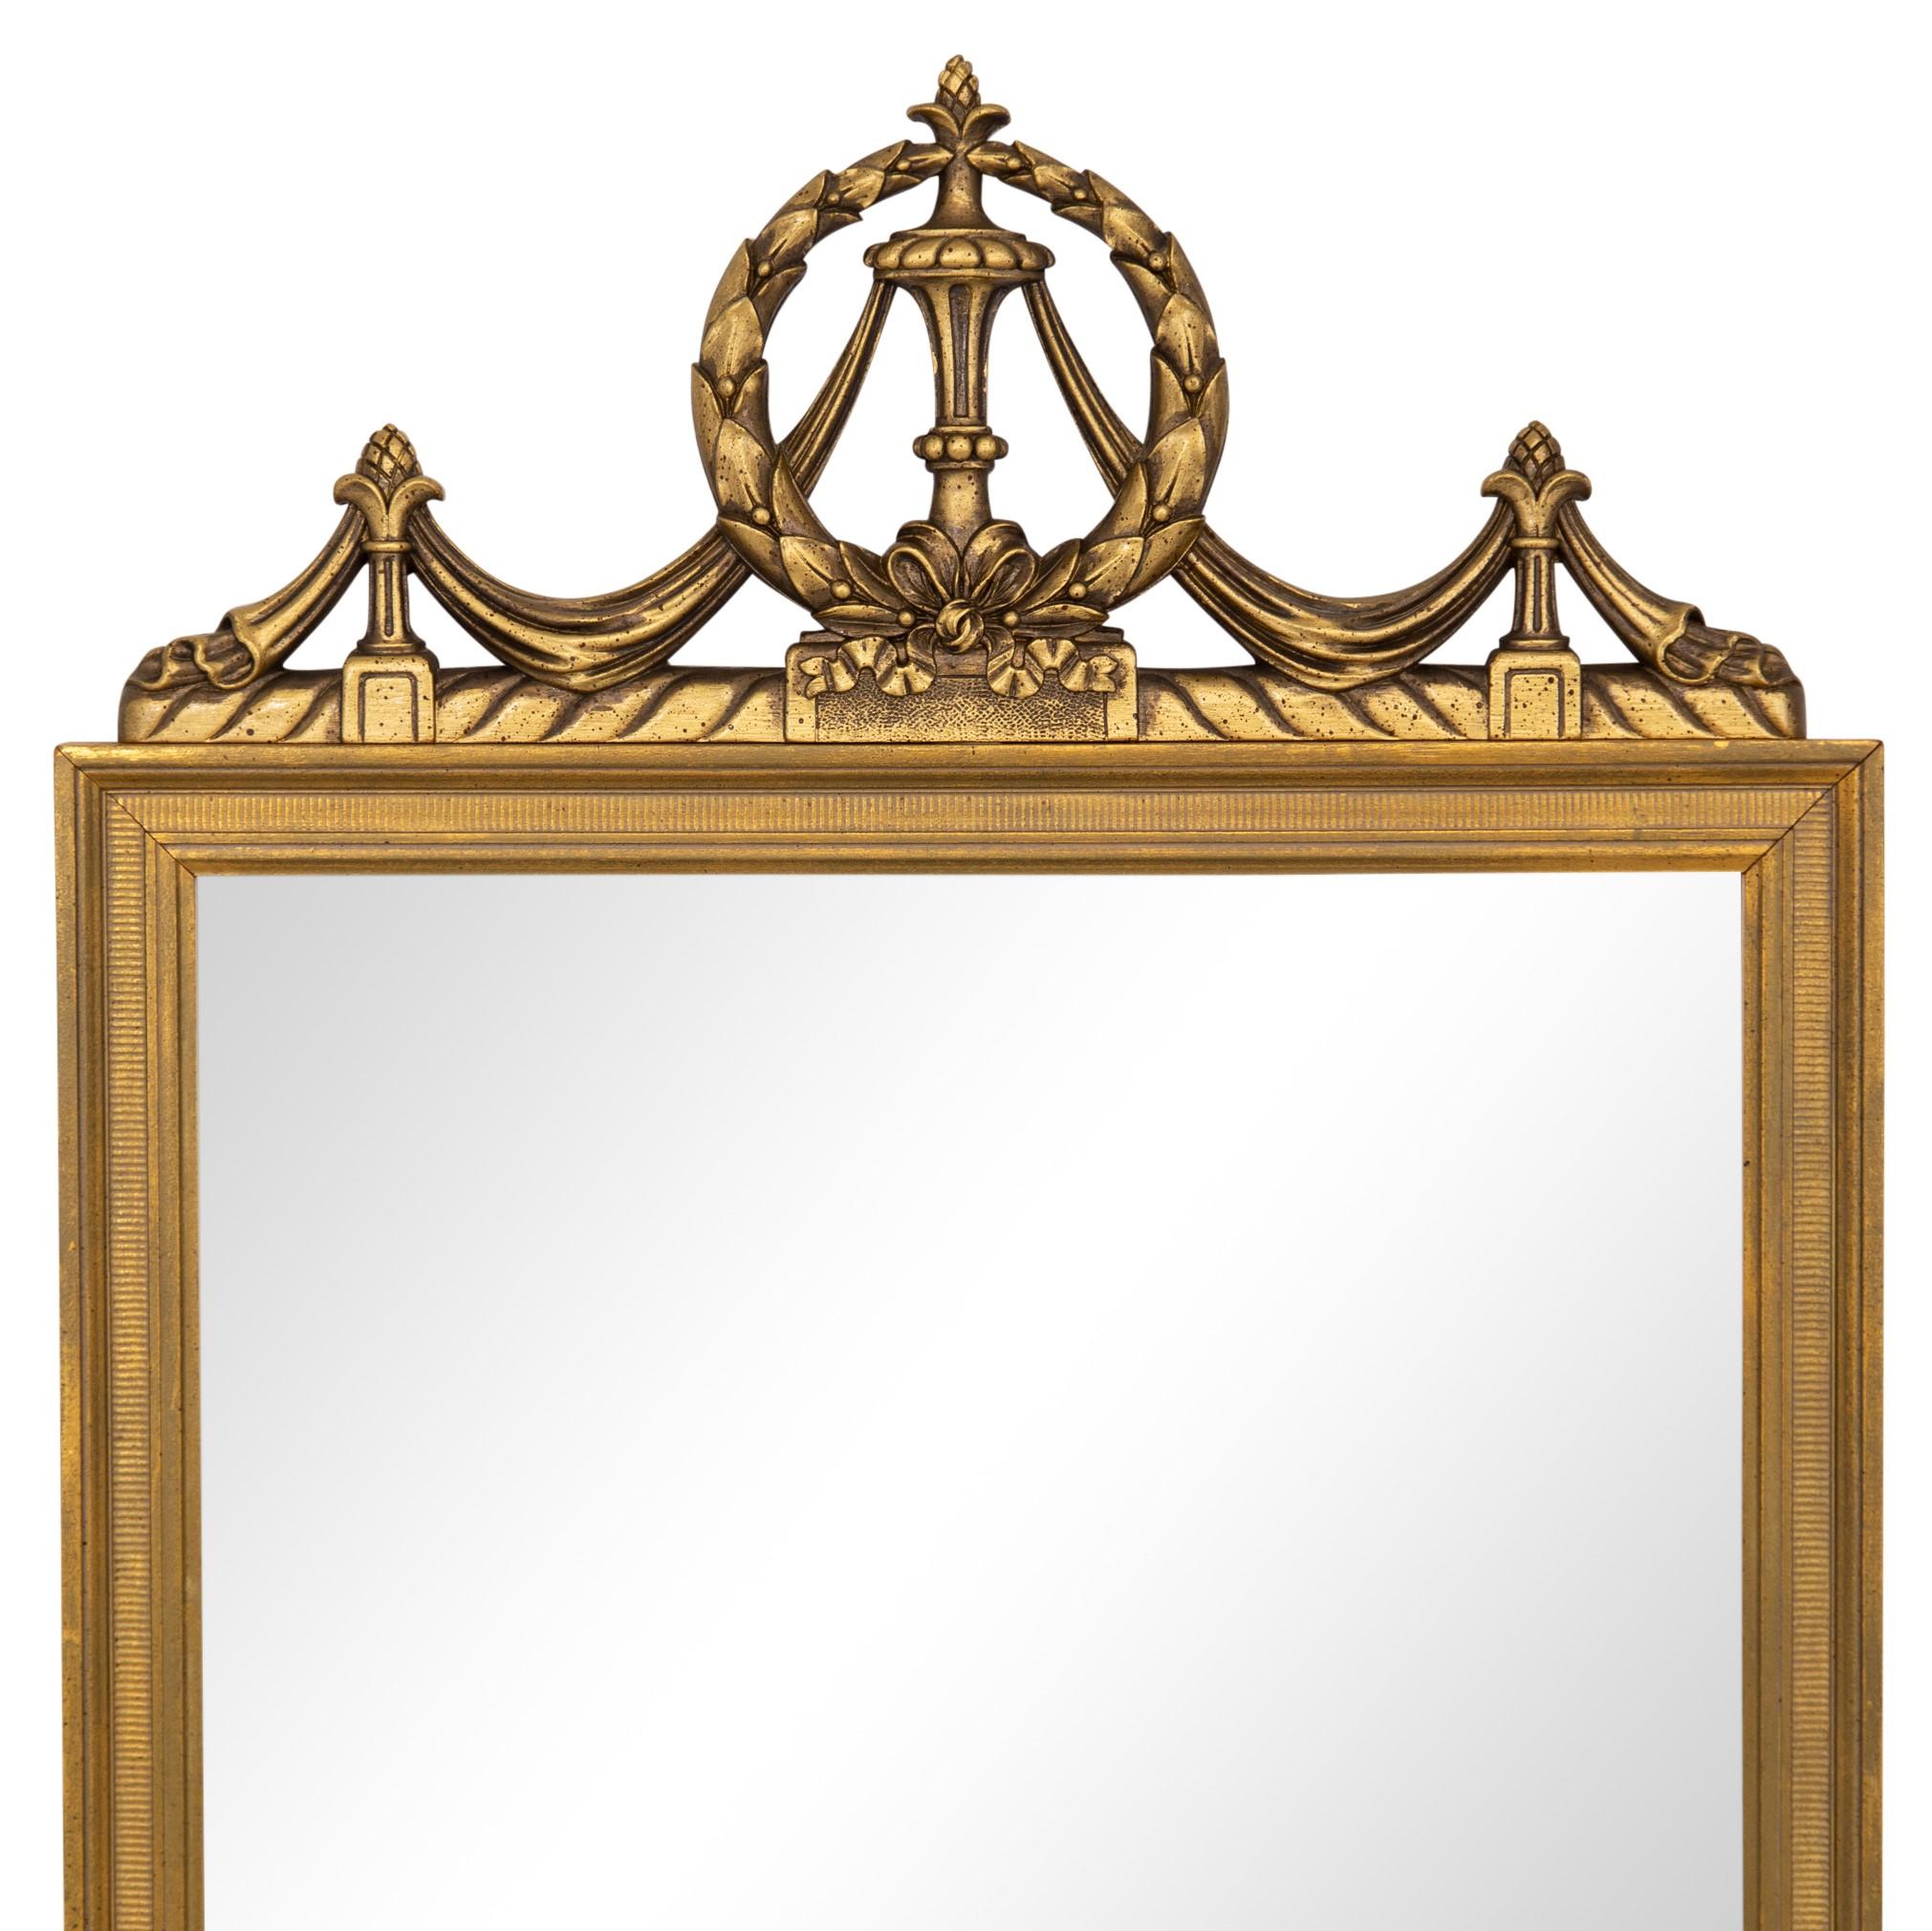 Gilt French Louis XVI Style Tall Gilded Mirror with Swag & Wreath Crest